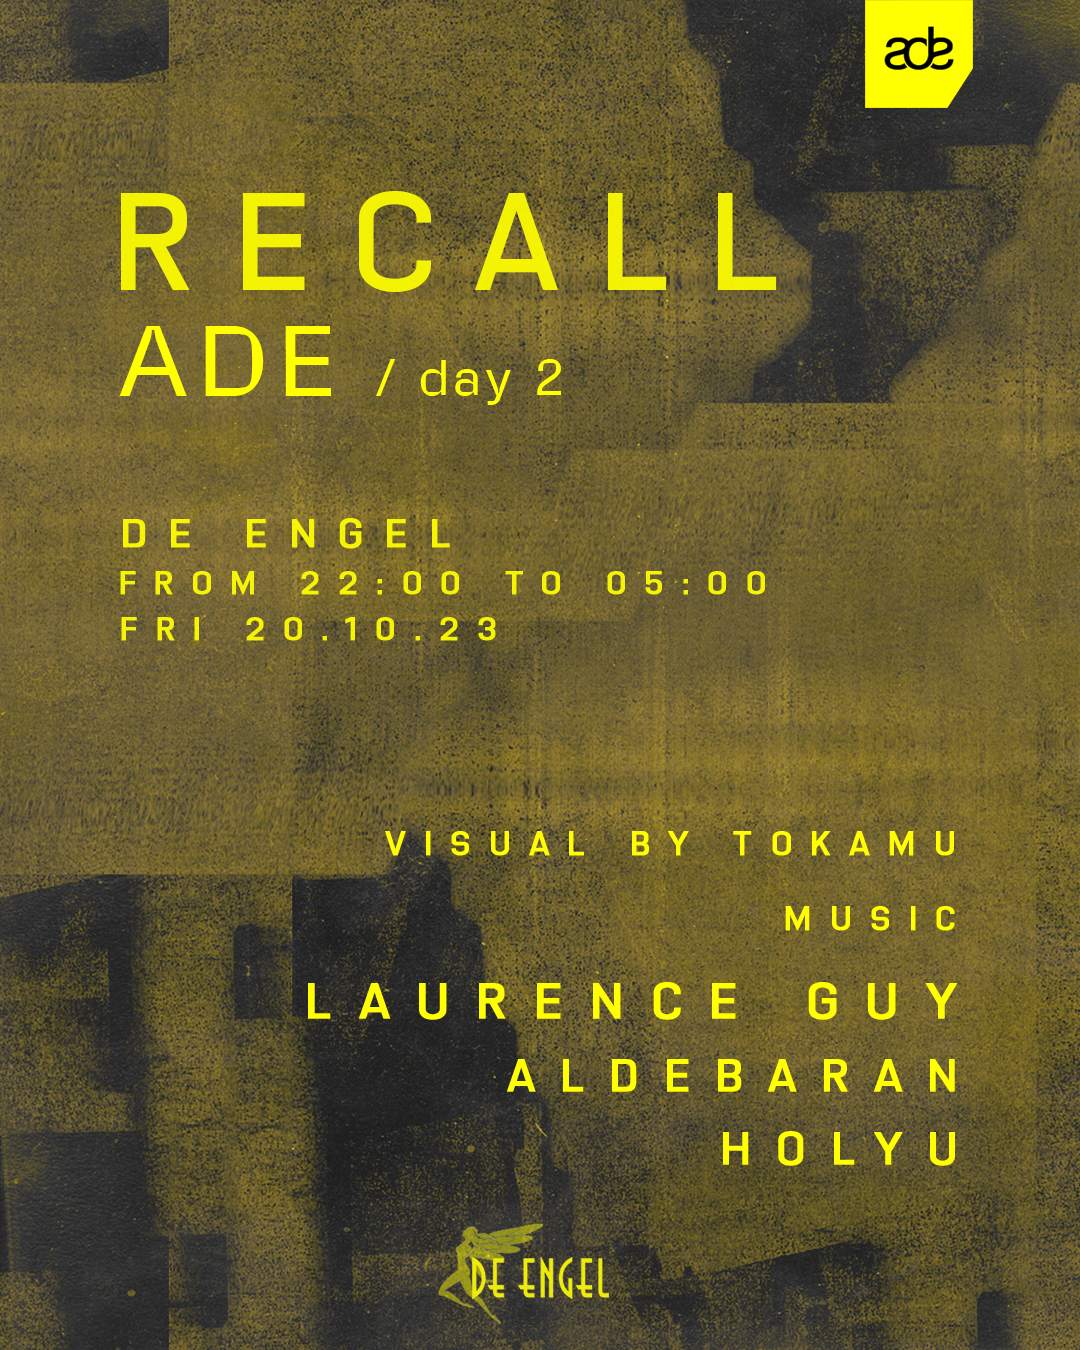 Recall ADE - day 2 - フライヤー表